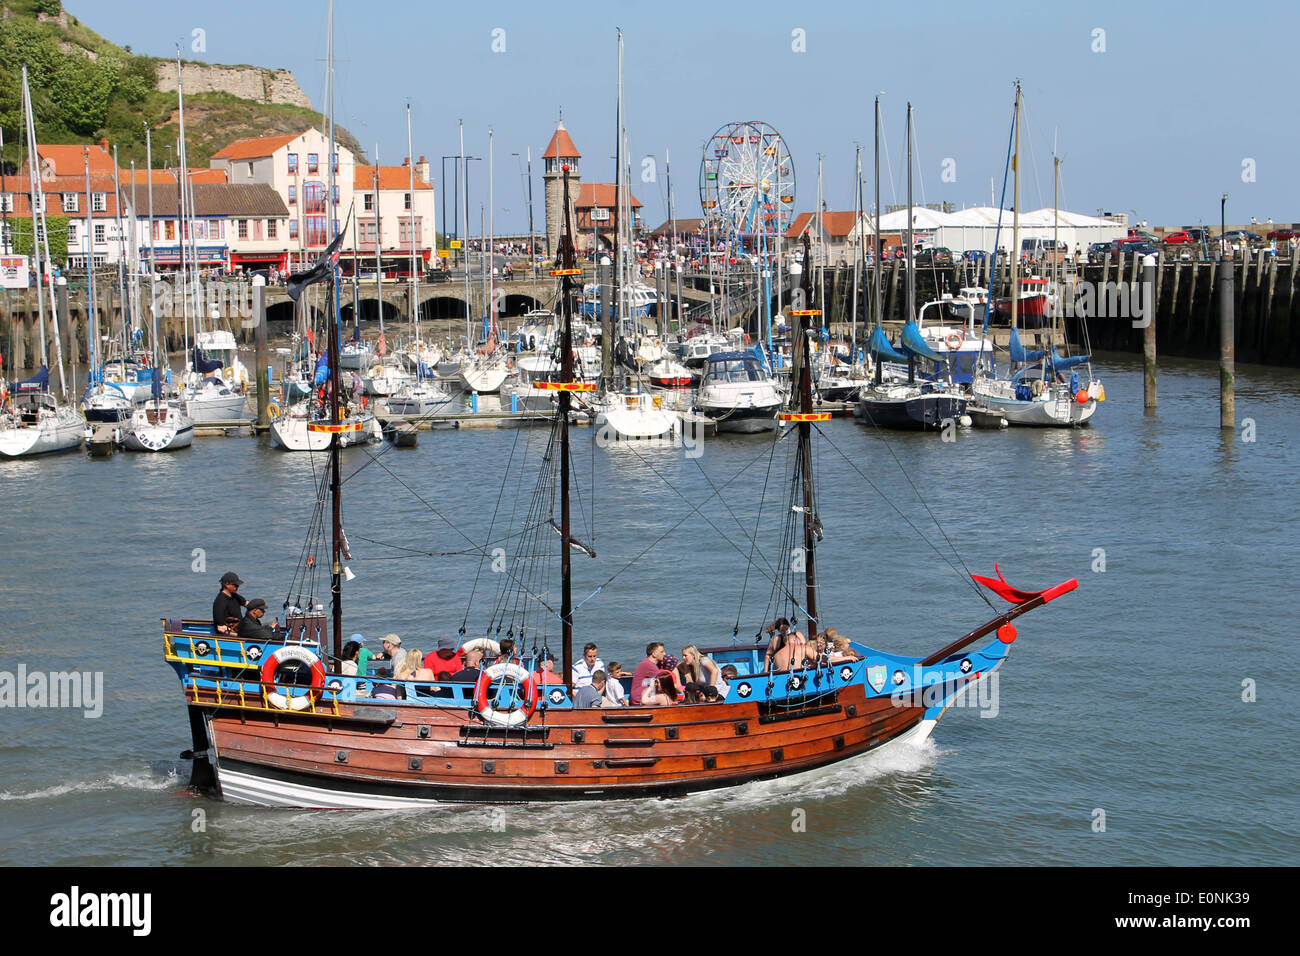 Scarborough, UK. 17th May 2014.  Scarborough South Bay harbor on the 17th of May 2014. A large number of tourists are visiting the town this weekend to enjoy the beautiful summer weather. People are enjoyinh a ride on the Hispaniola pirate ship. Credit:  Lifestyle pictures/Alamy Live News Stock Photo